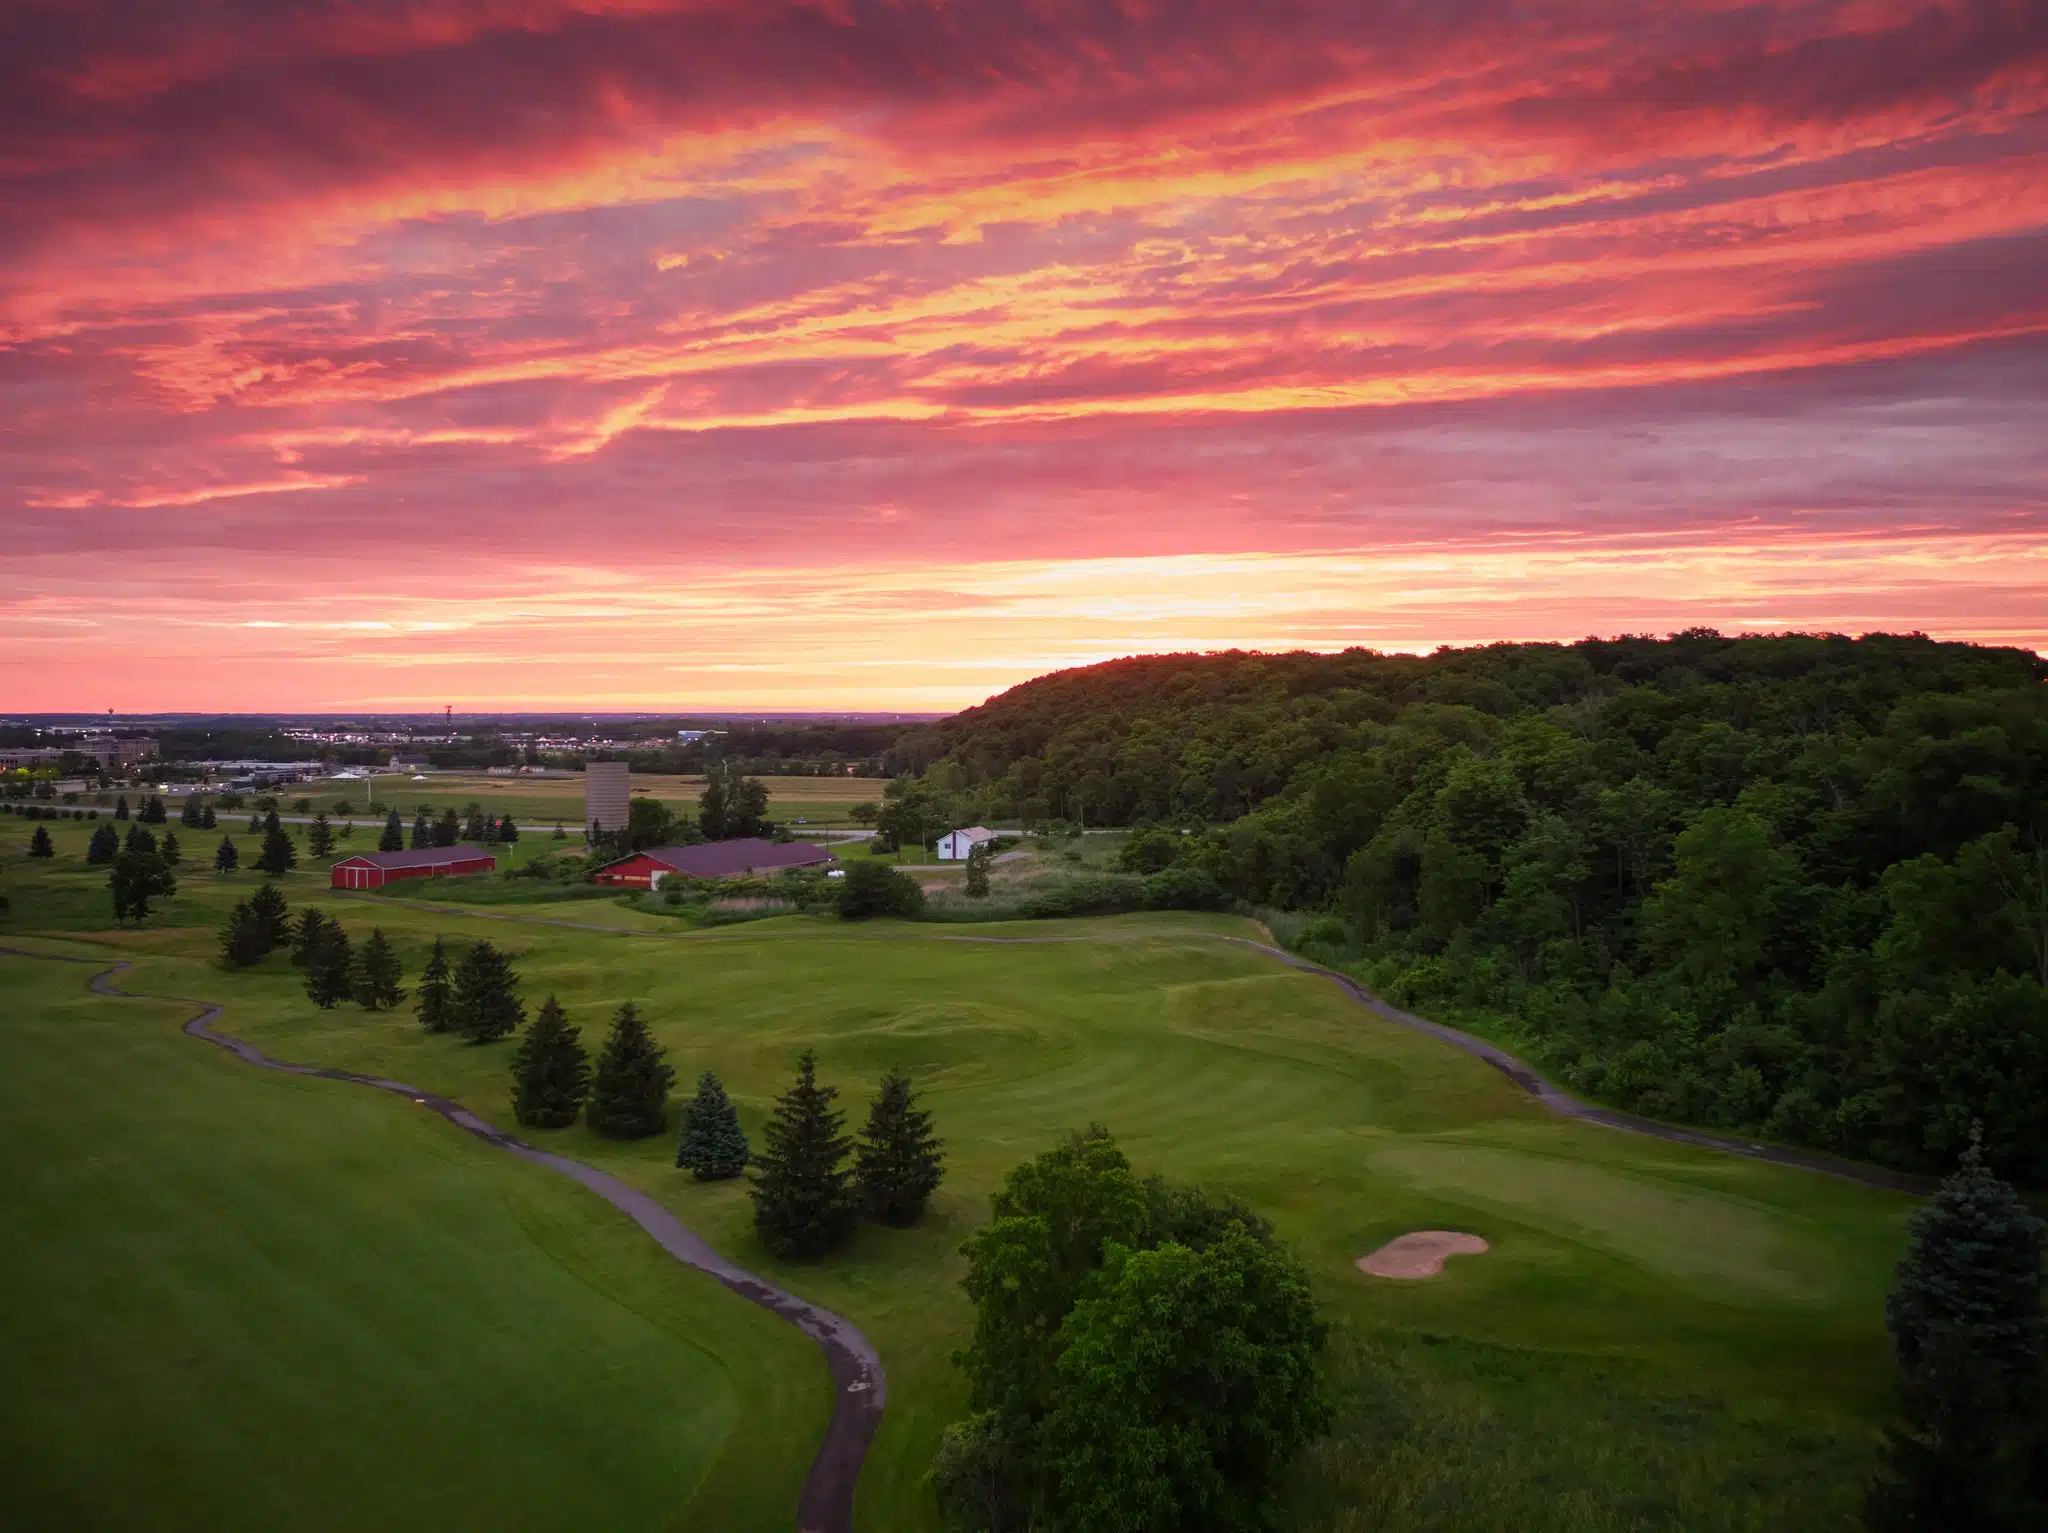 Aerial image of royal niagara golf course with vibrant red sunrise